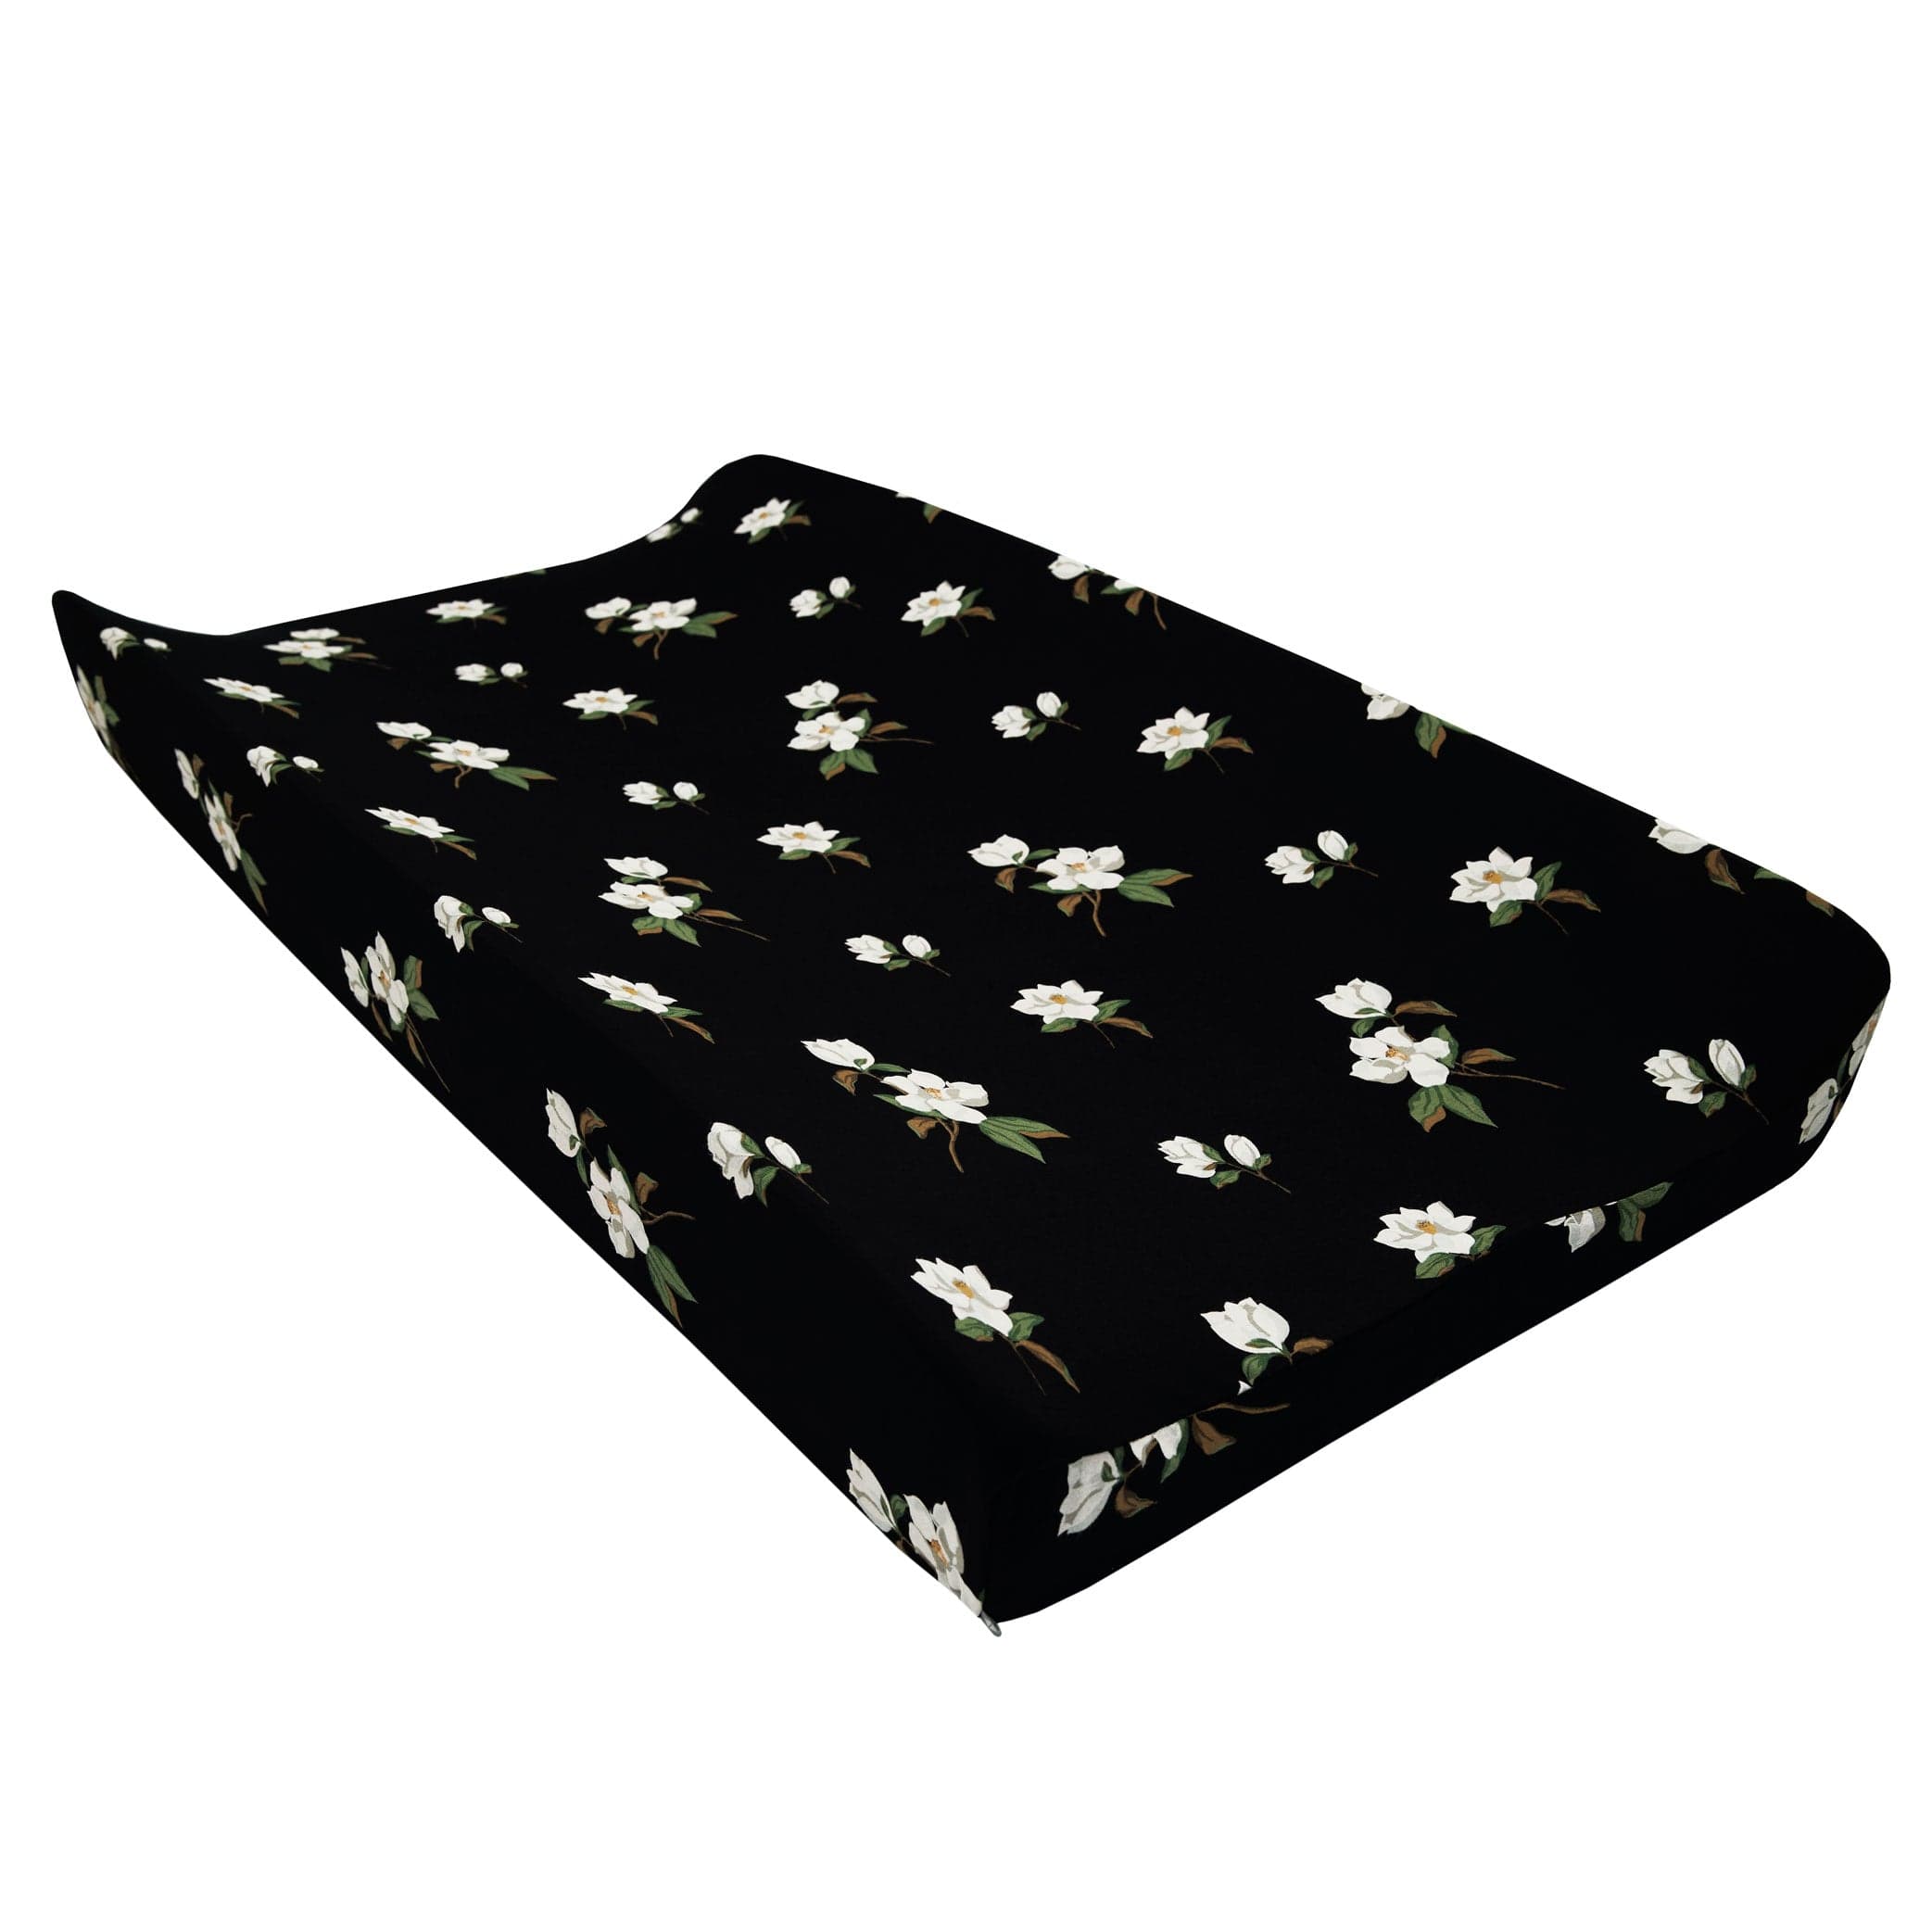 Kyte BABY Change Pad Cover One Size / Big Magnolia on Midnight Change Pad Cover in Big Magnolia on Midnight